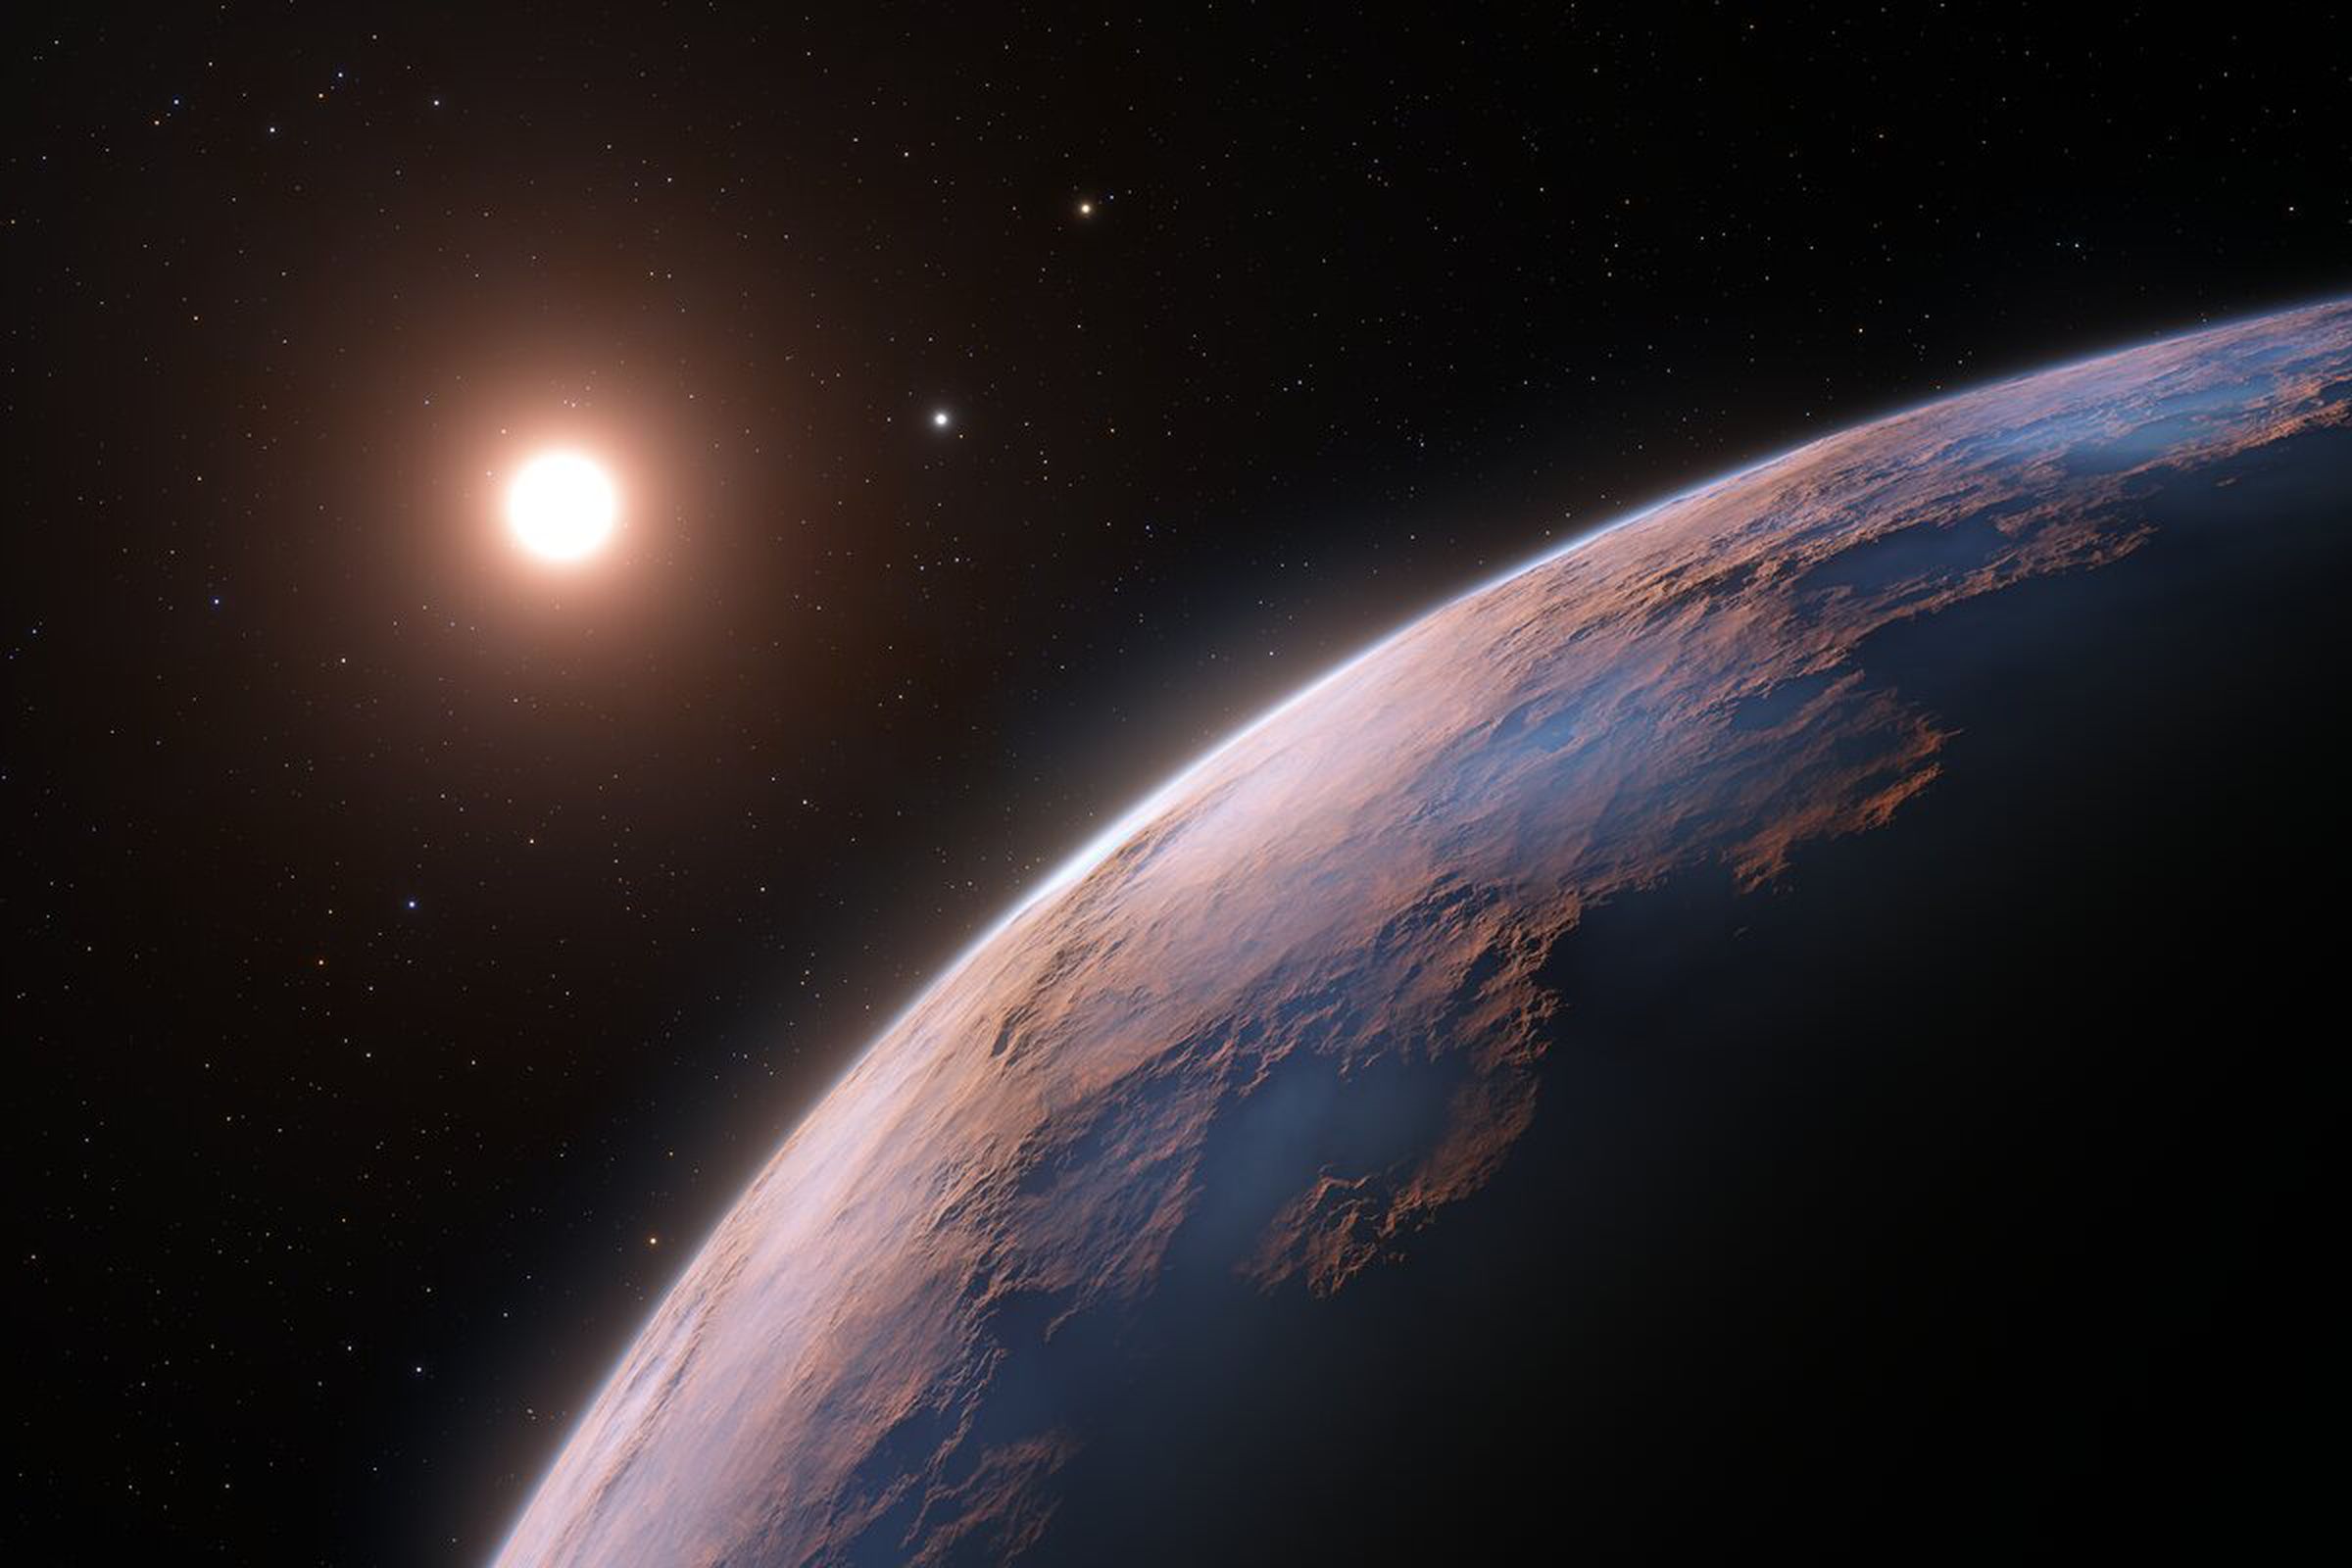 An artistic rendering of Proxima d, a likely exoplanet around Proxima Centauri.